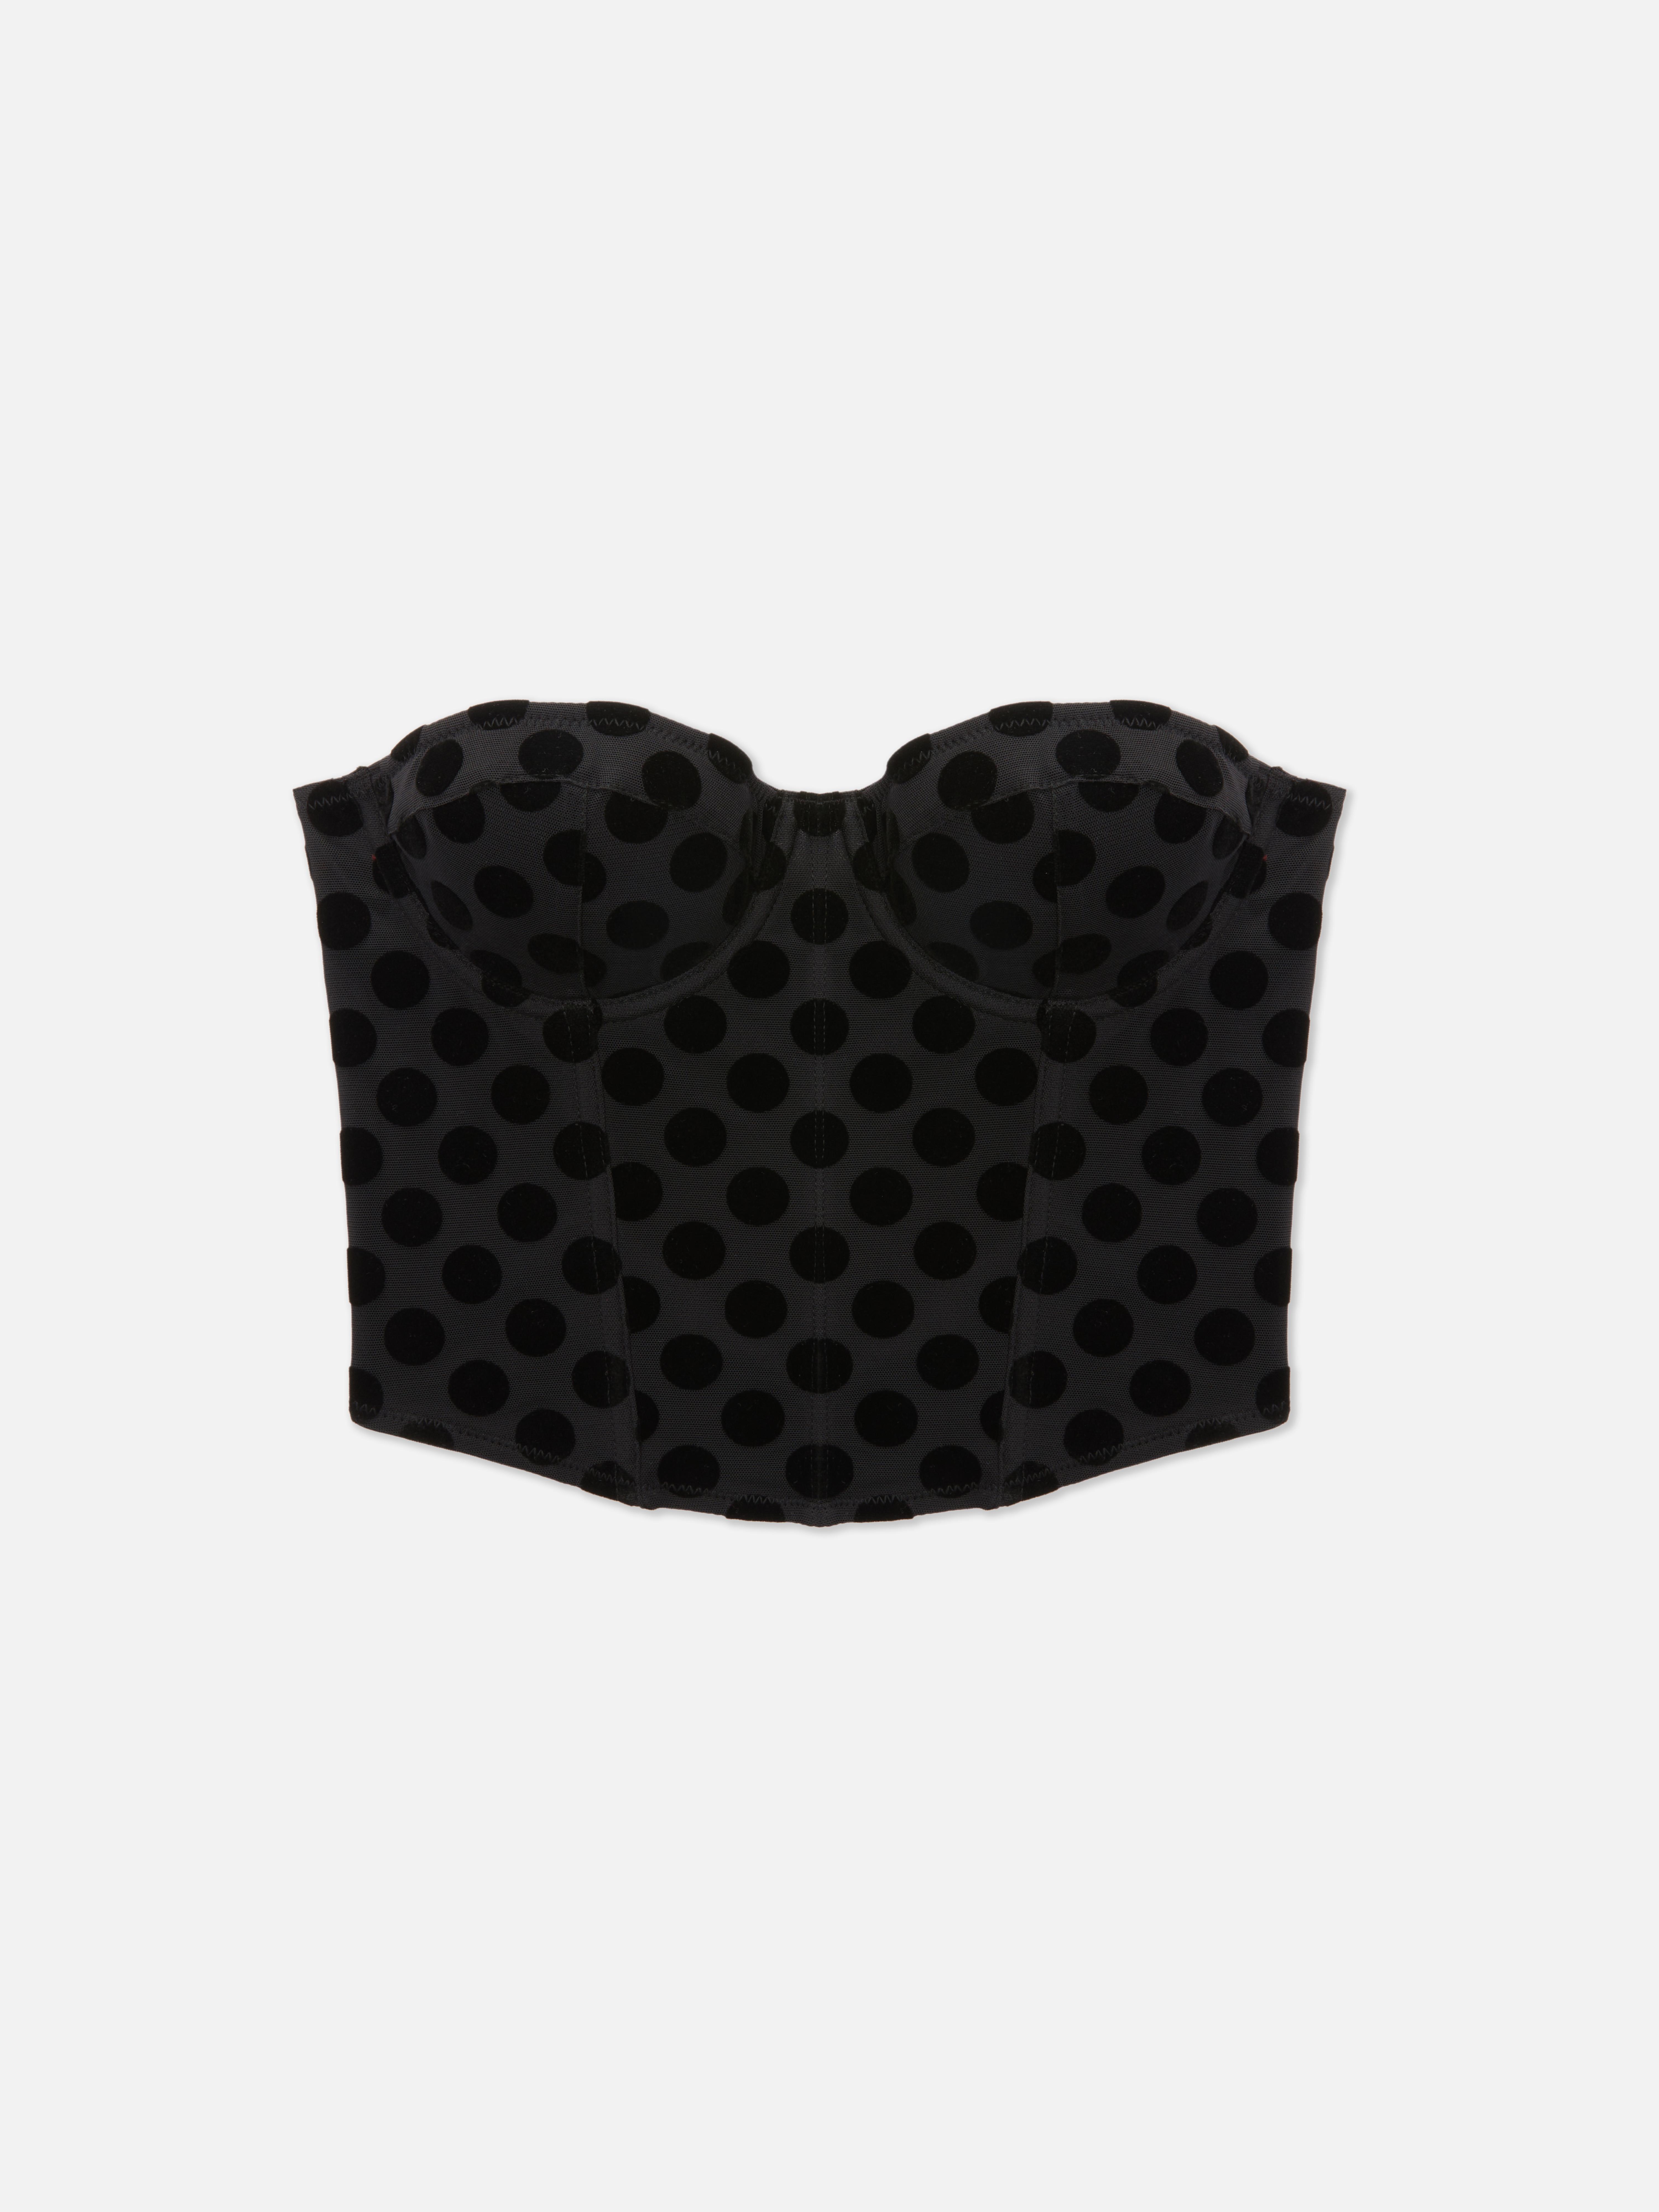 PRIMARK MAXIMISE+2 CUP SIZES TOTALLY SEXY BLACK LACE TEDDY